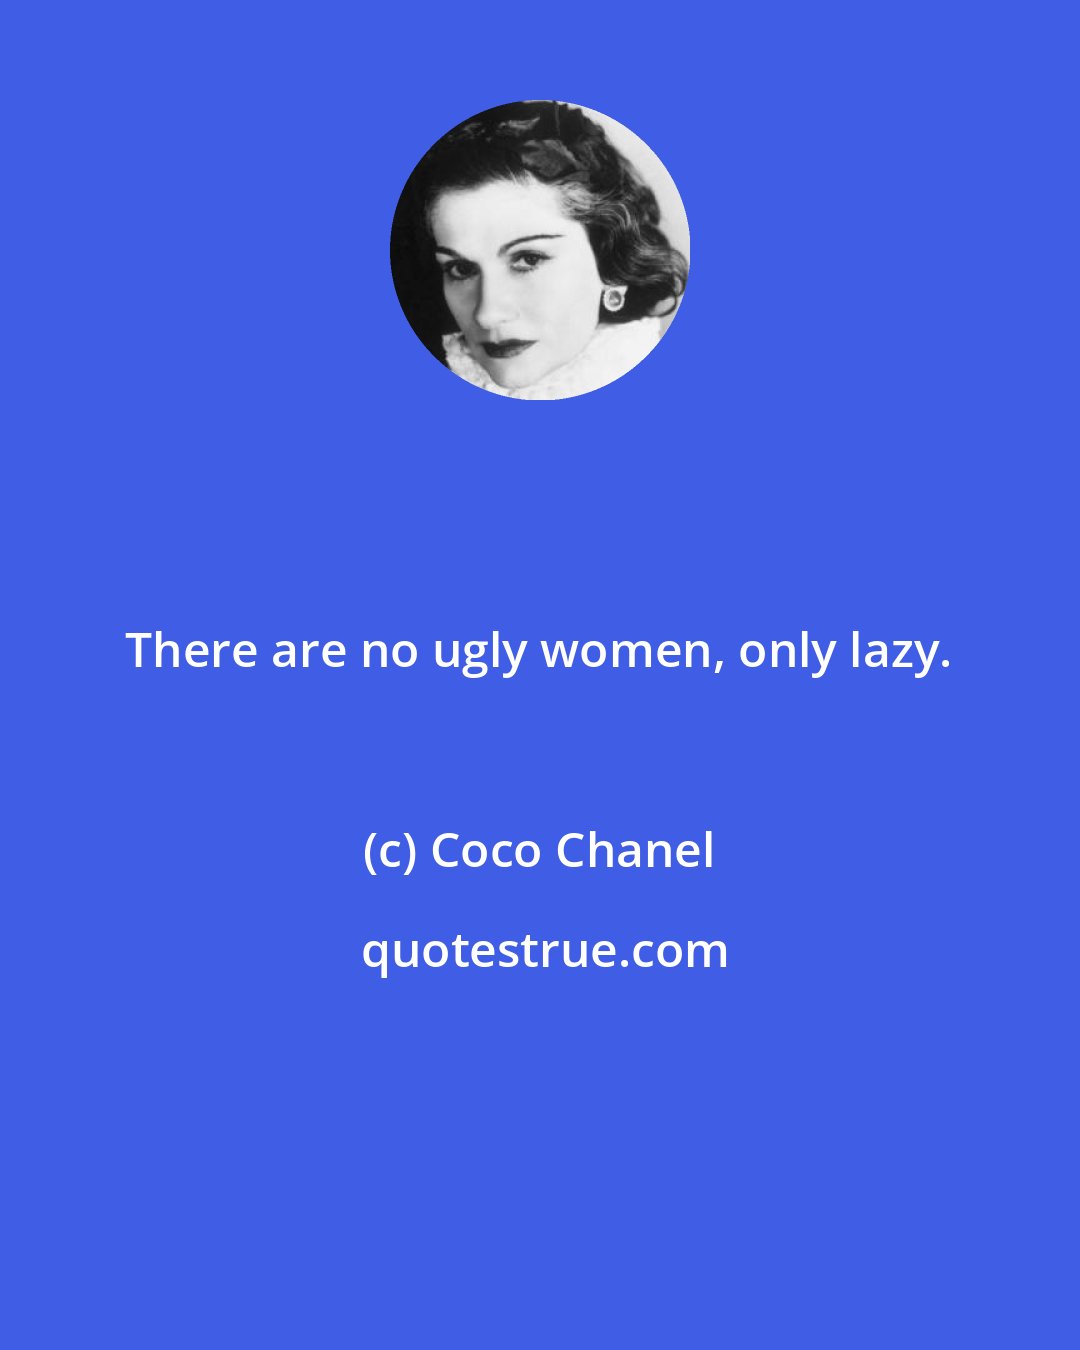 Coco Chanel: There are no ugly women, only lazy.